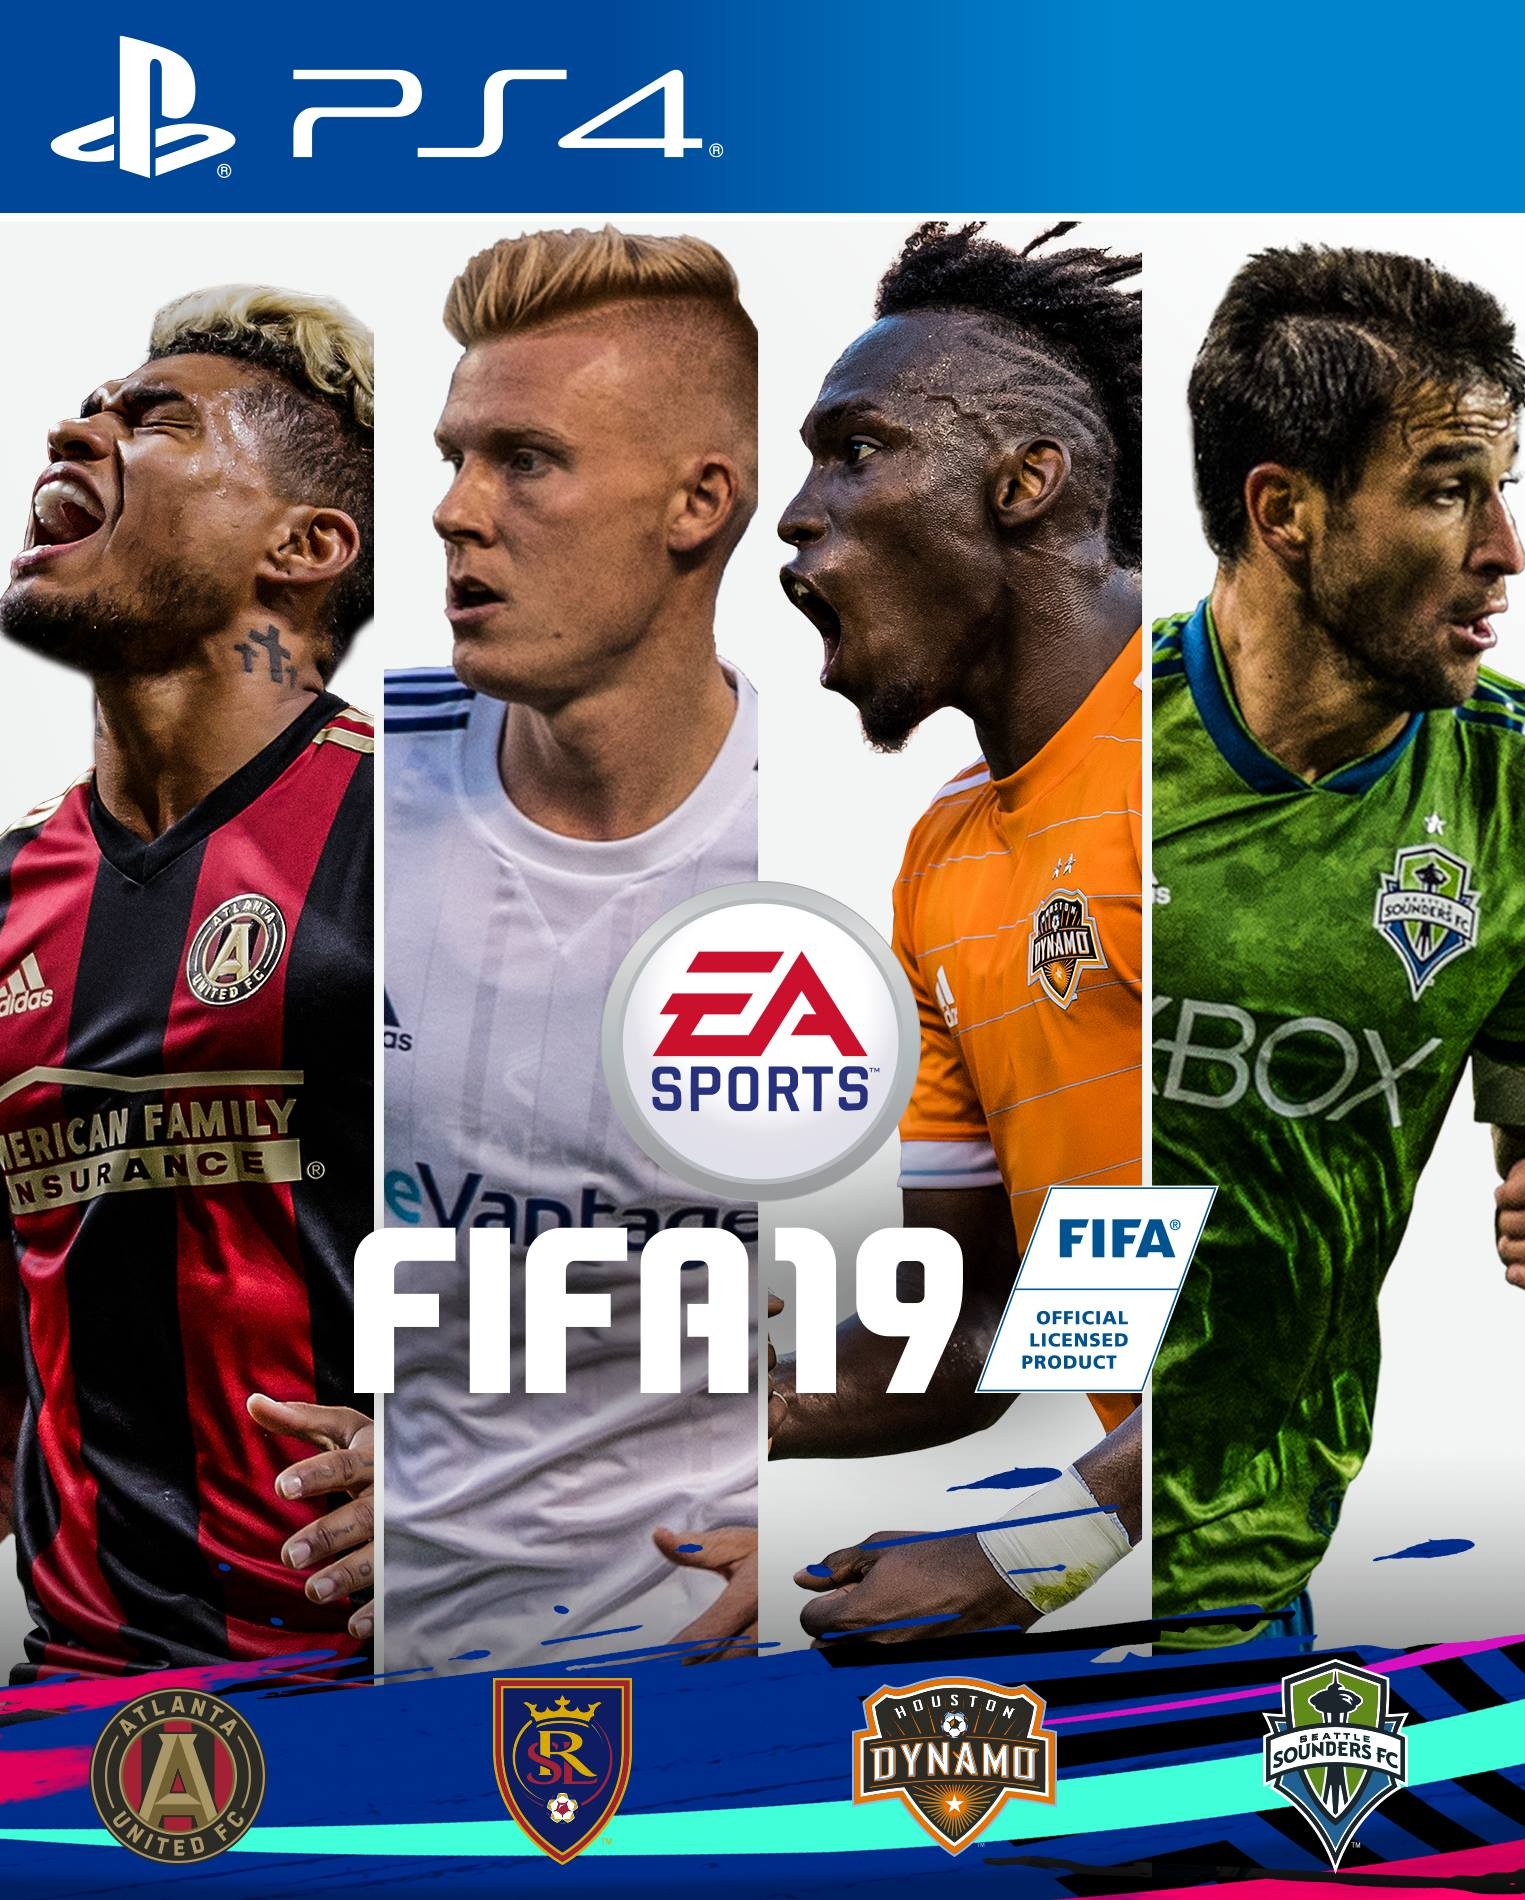 FIFA 22 is out! Download a custom Portland Timbers cover!